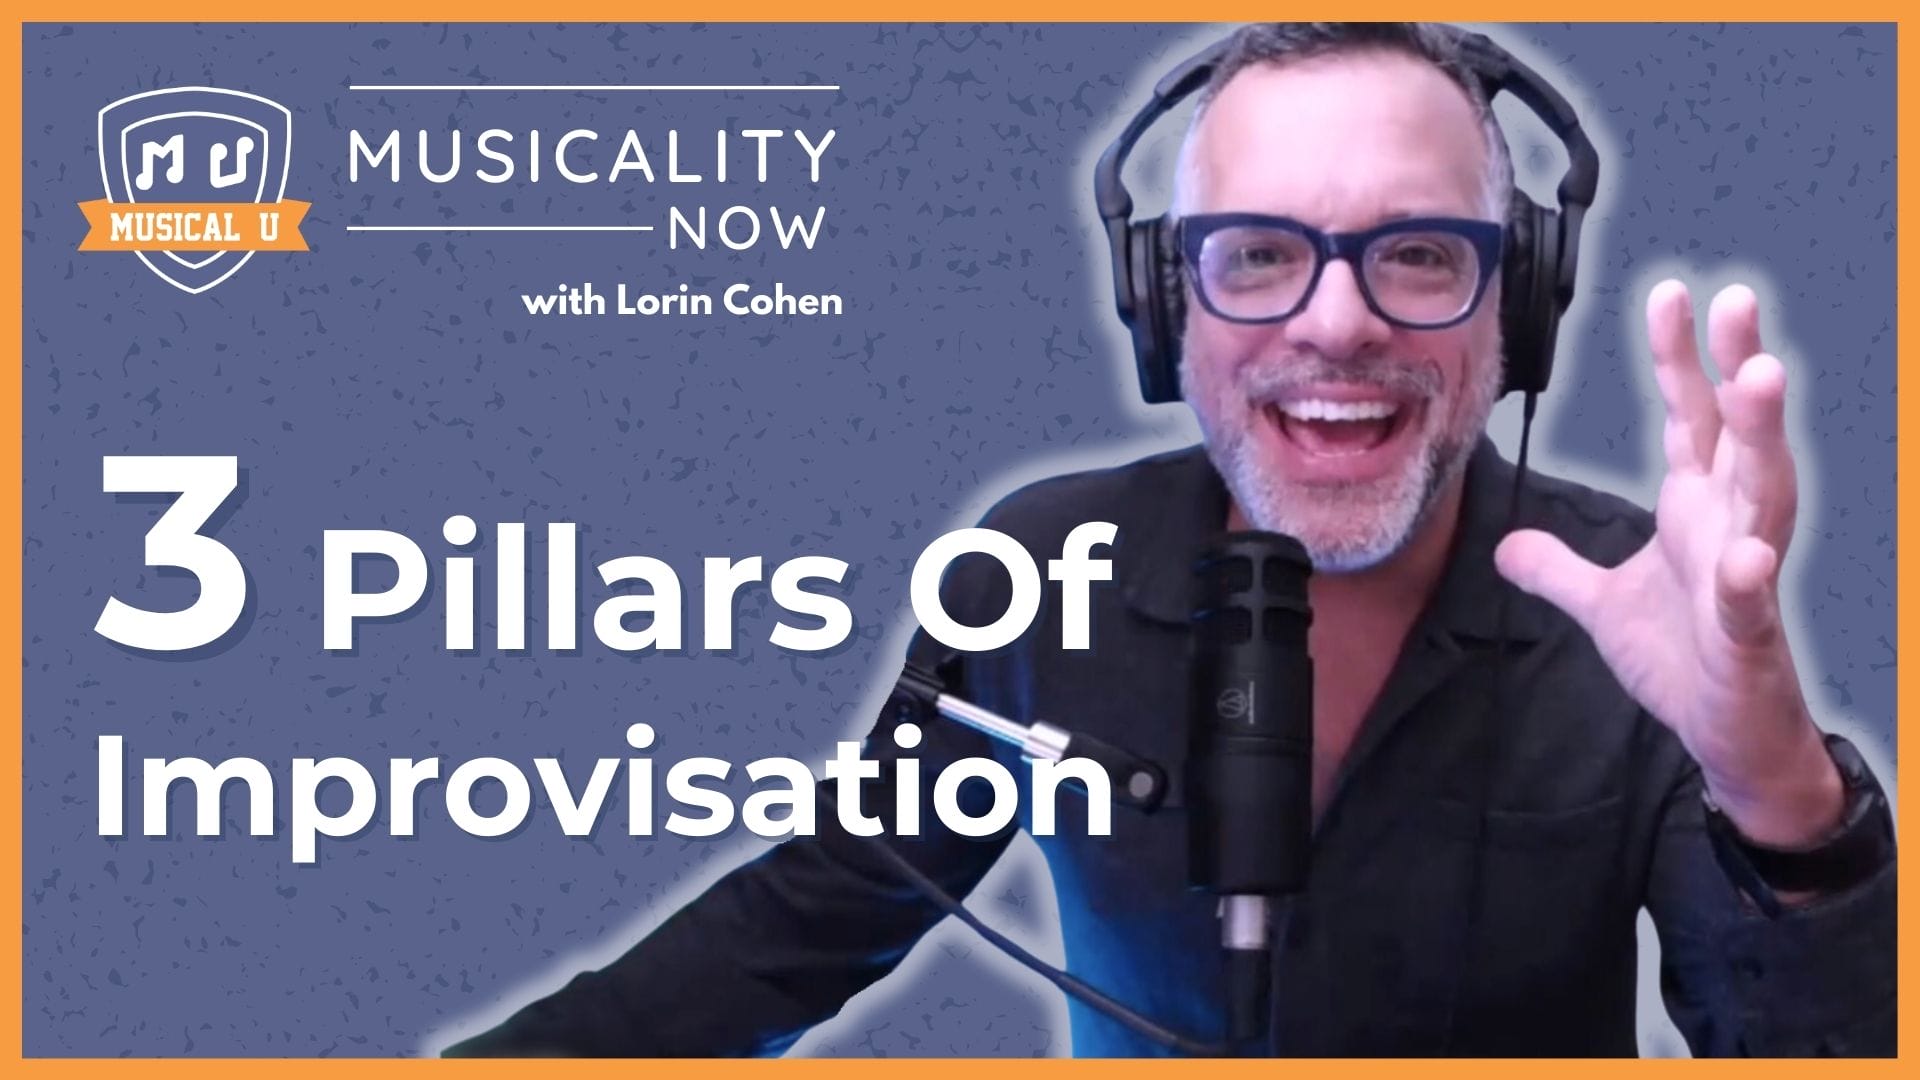 The 3 Pillars Of Improv, with Lorin Cohen